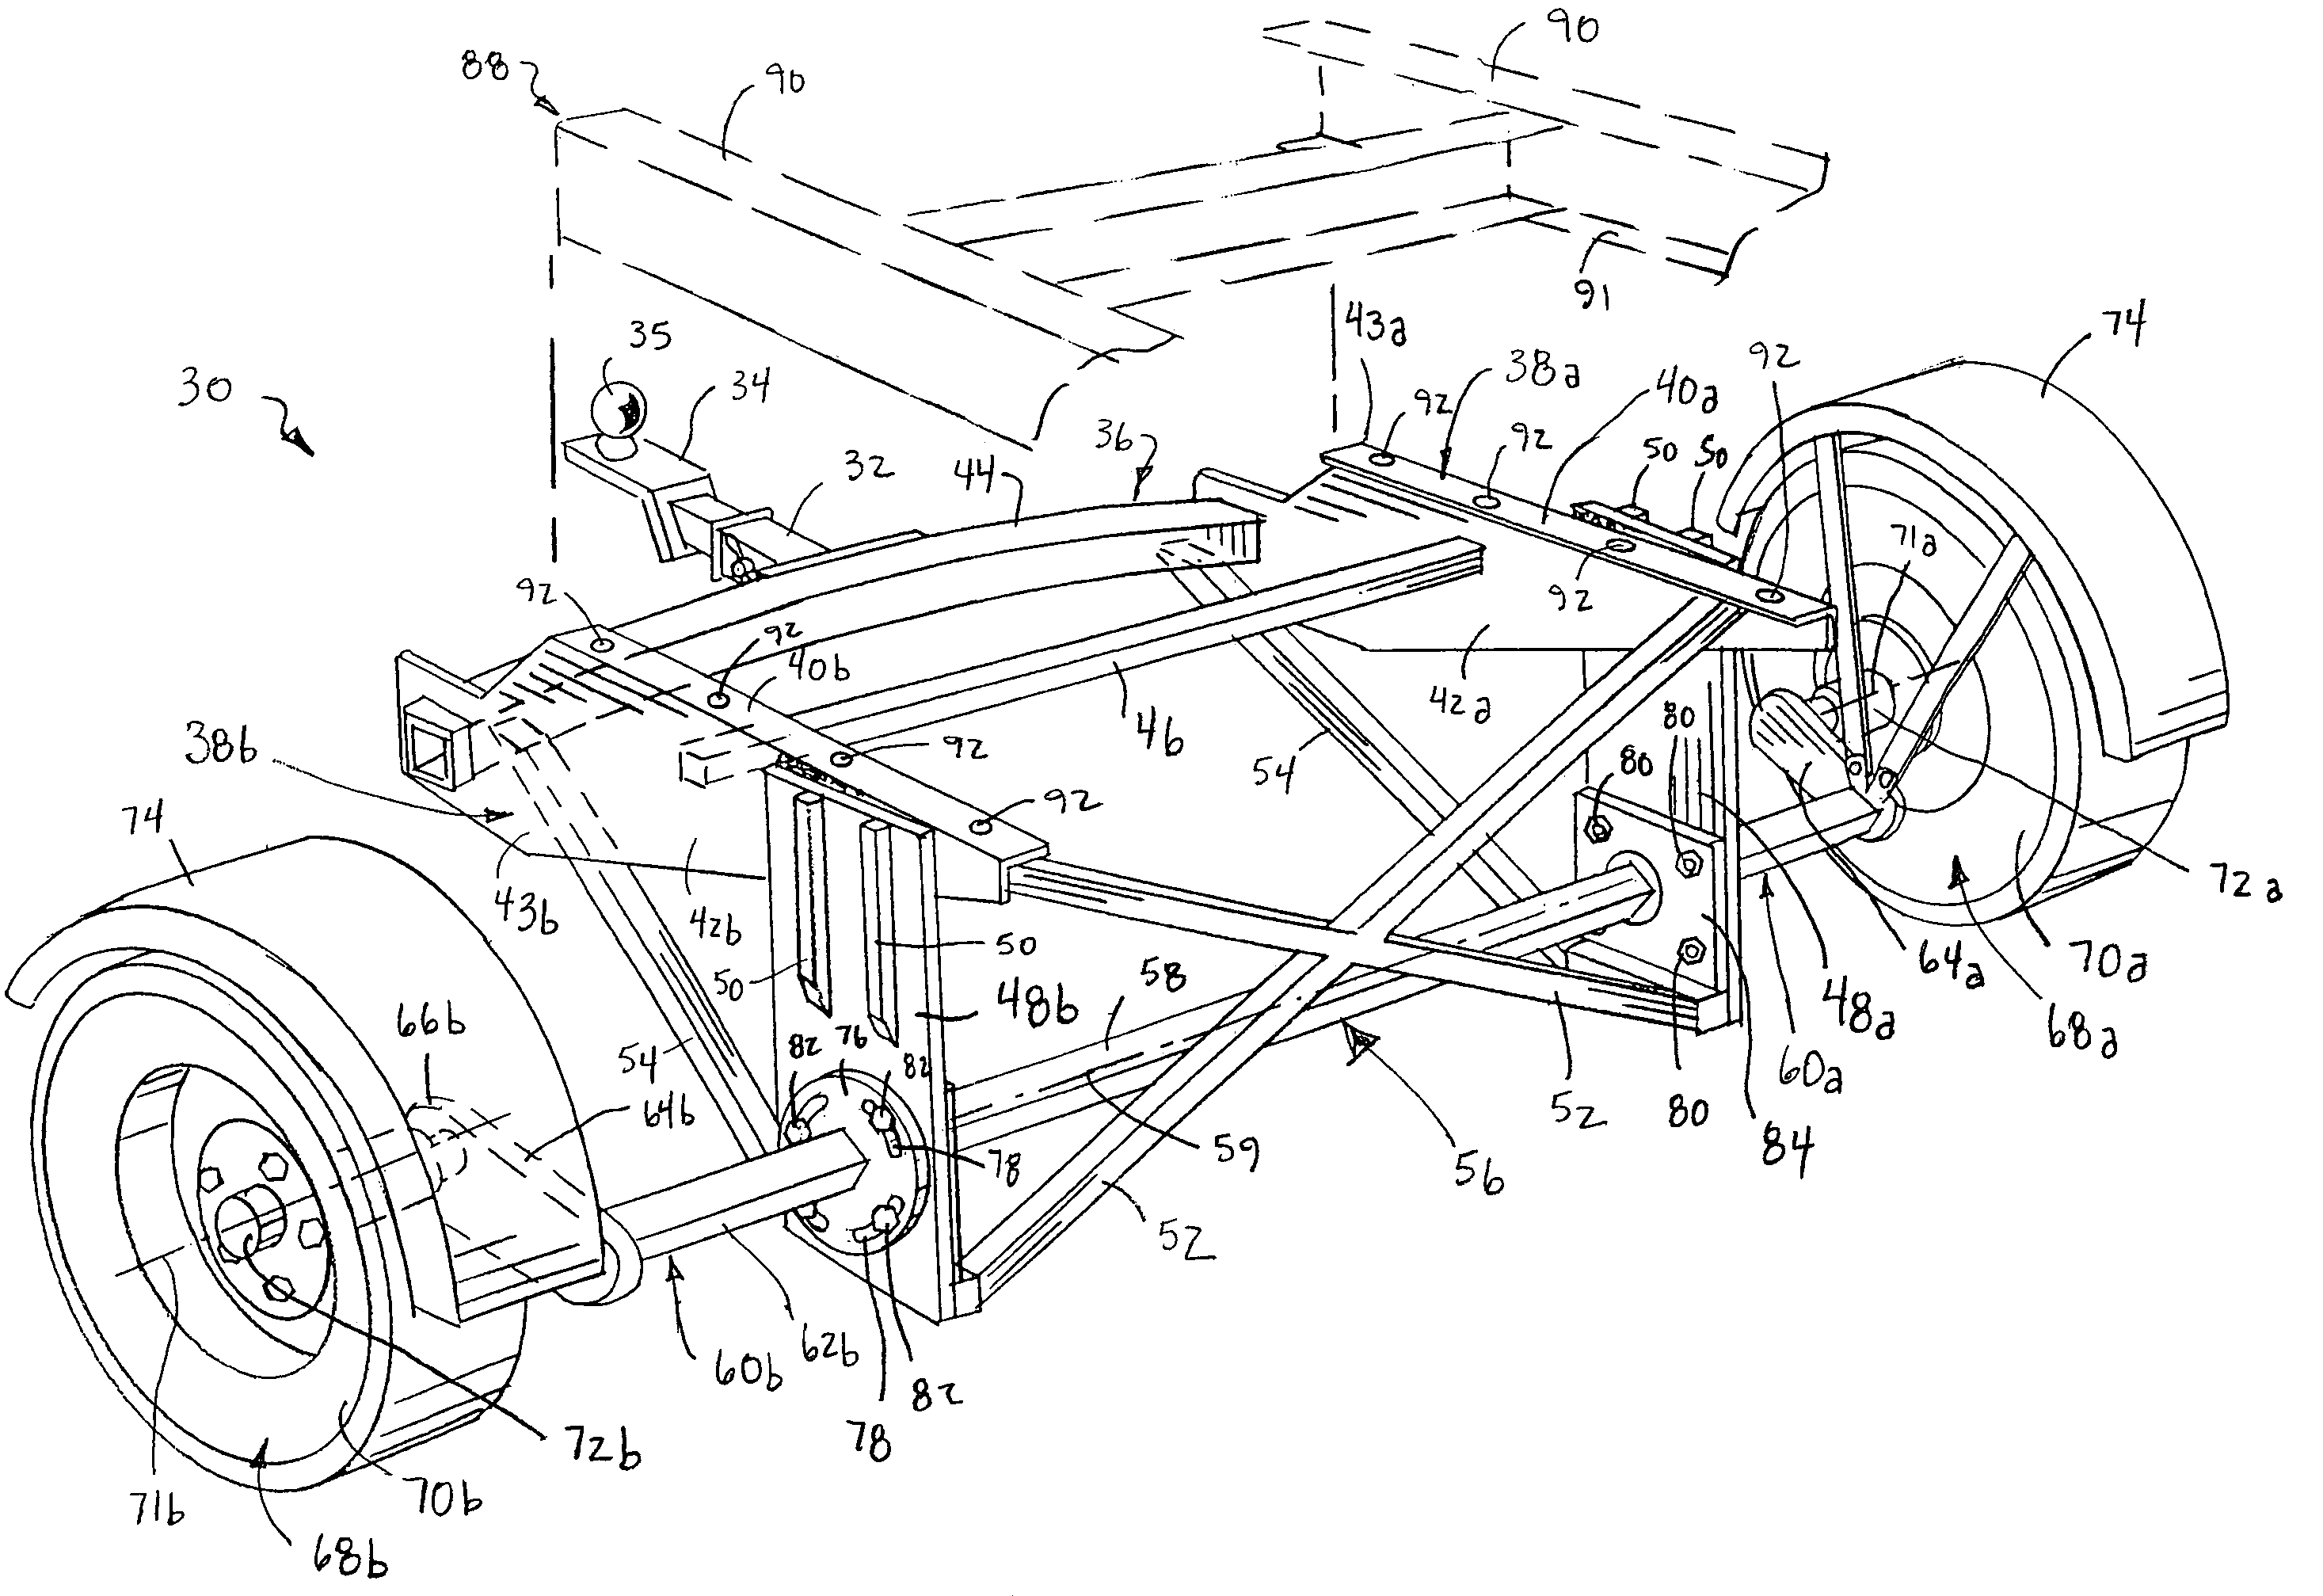 Detachable axle and hitch assembly